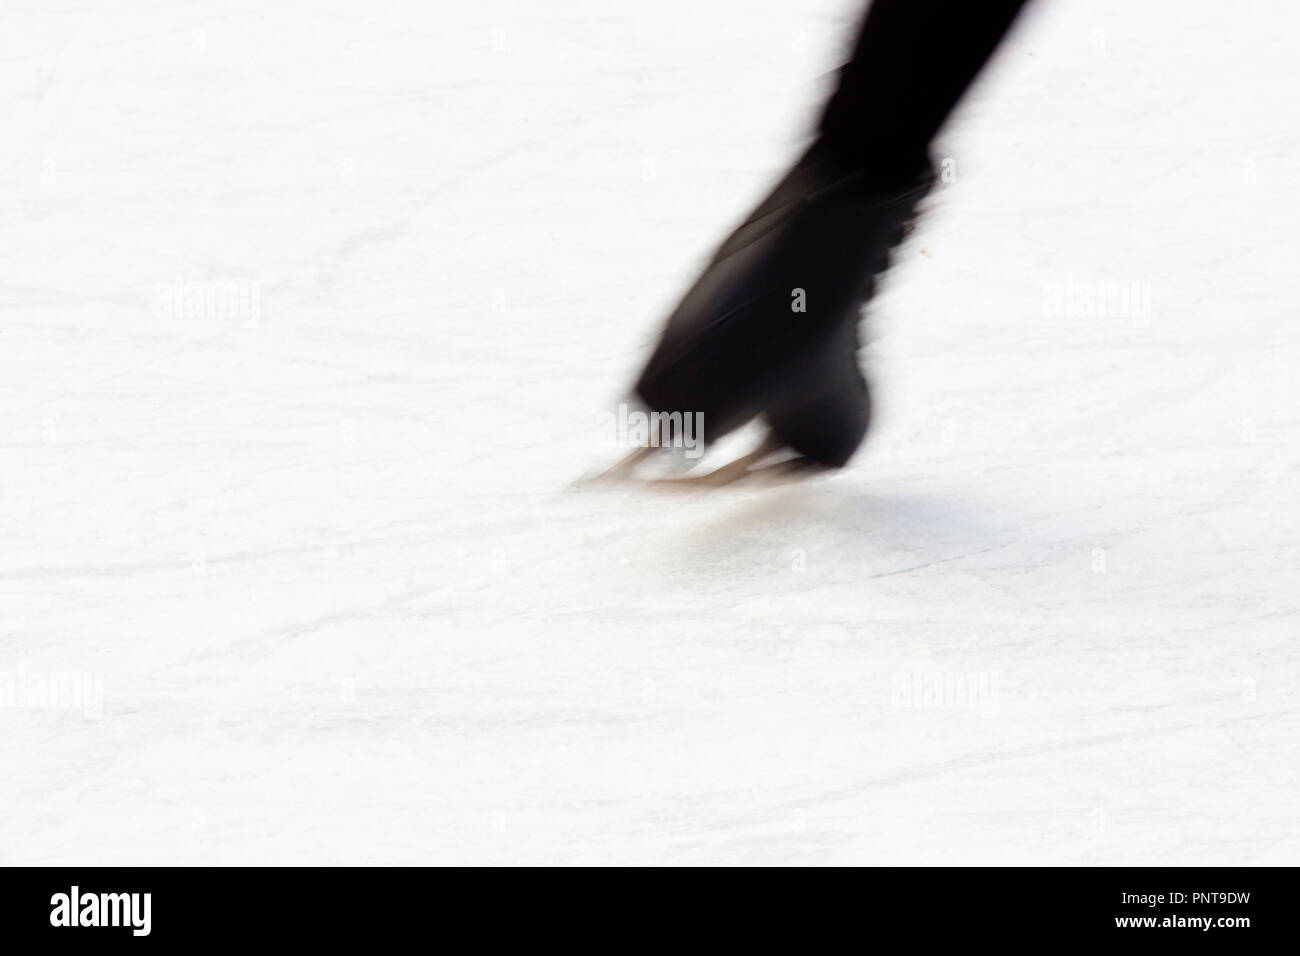 Blurry abstract ice skating shoe in action, close up Stock Photo